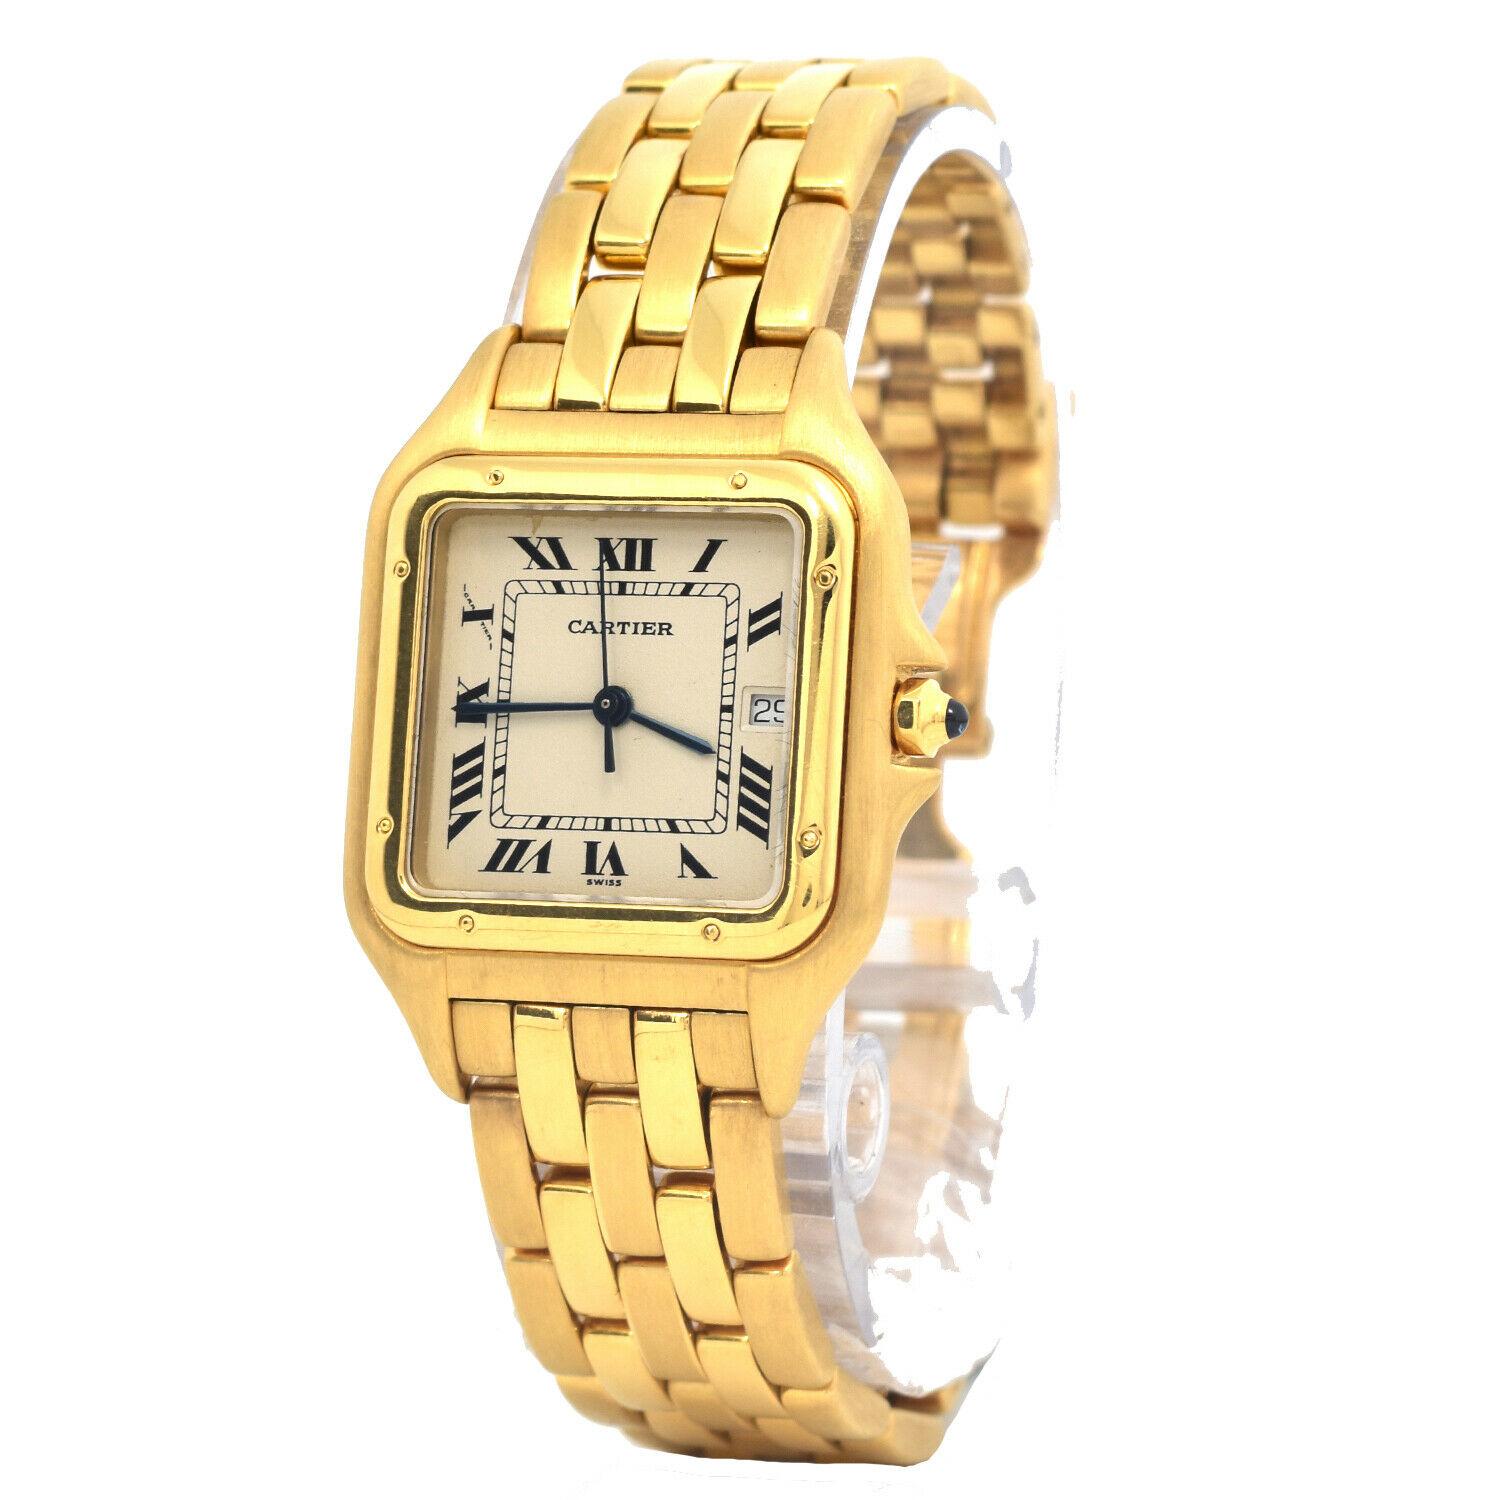 Available with its box and papers. Beautiful and elegant Cartier Panthere cased in yellow gold and. The watch is in top condition with its quartz movement working perfectly. Also accompanied is our warranty and guarantee. 
Brand: Cartier
Model Name: